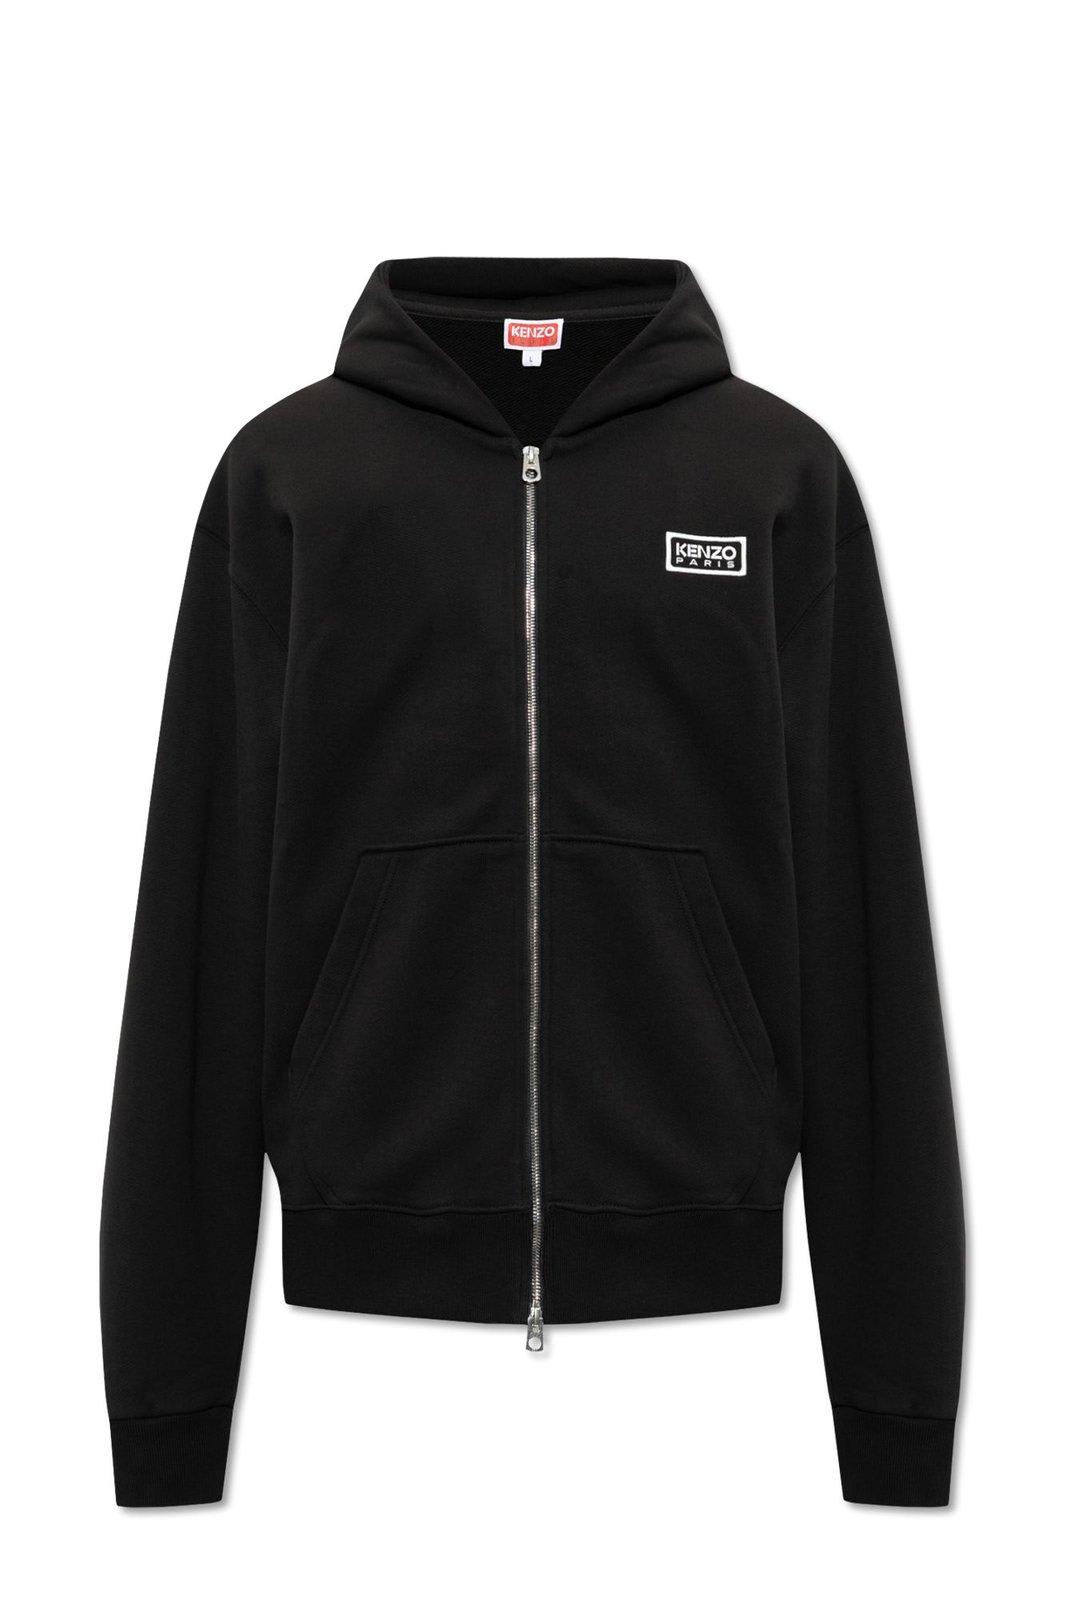 Logo Embroidered Zip Up Hoodie